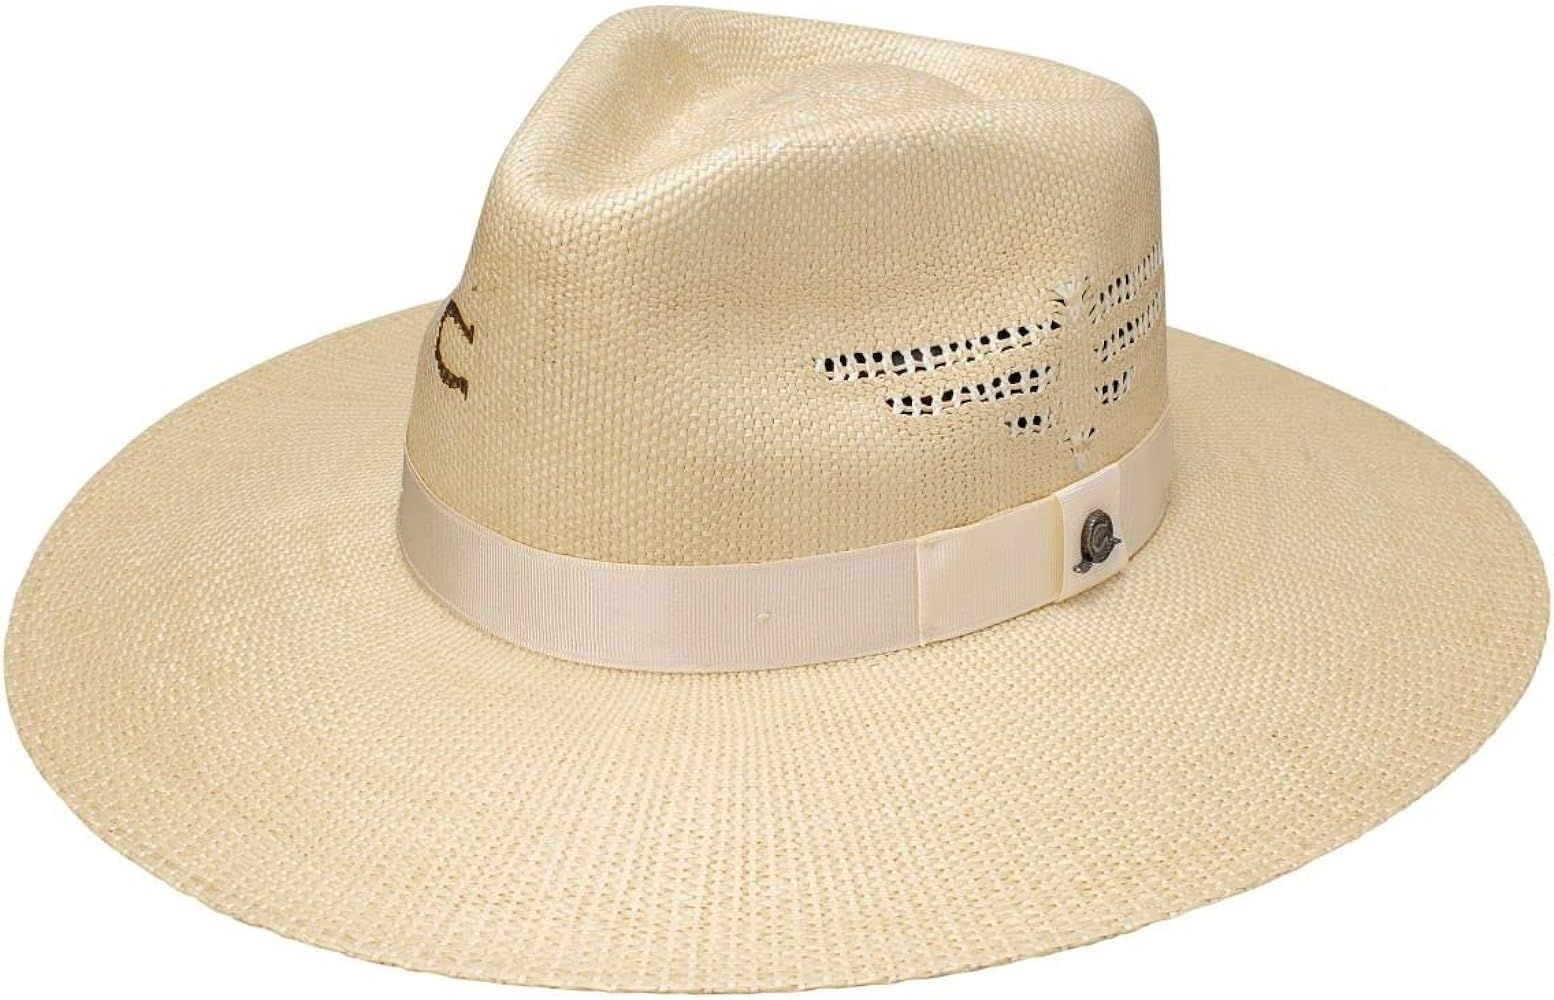 Charlie 1 Horse Mexico Shore – Straw Cowgirl Hat | Amazon (US)